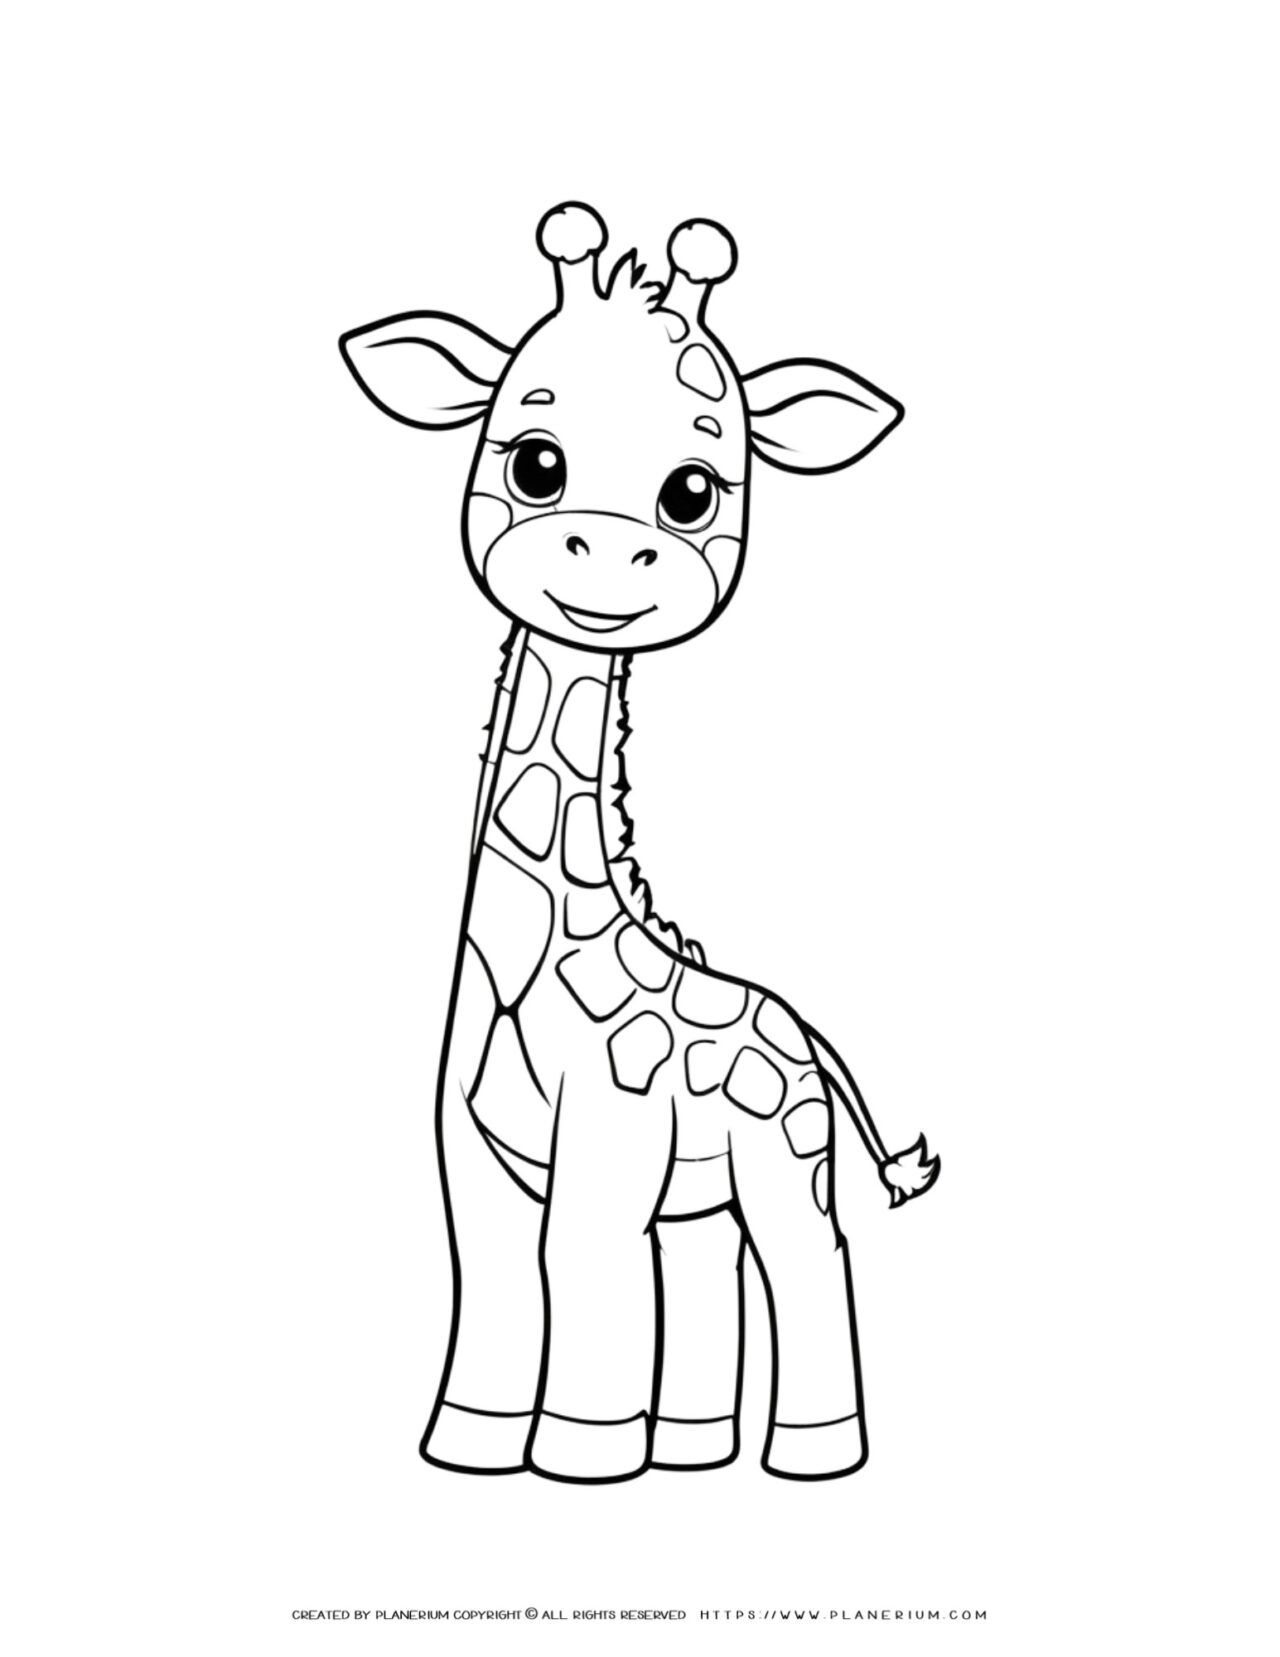 cute-giraffe-outline-coloring-page-for-kids